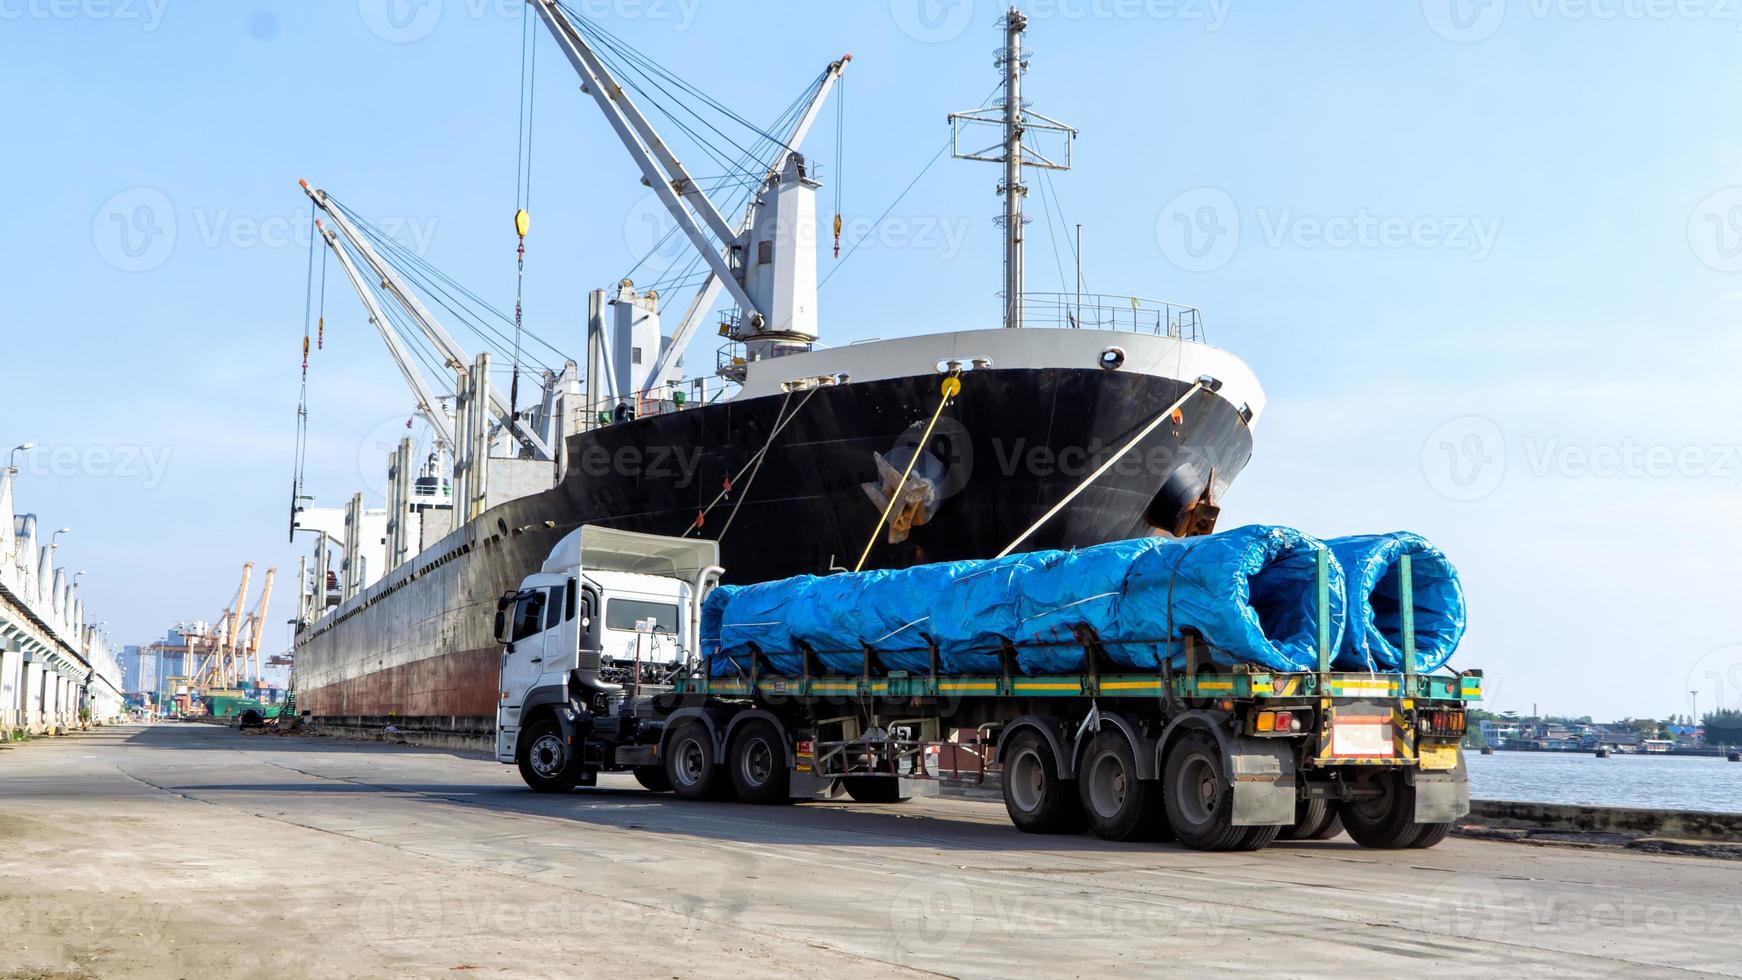 Container loading in a Cargo freight ship with industrial crane. Container ship in import and export business logistic company. Industry and Transportation concept. photo